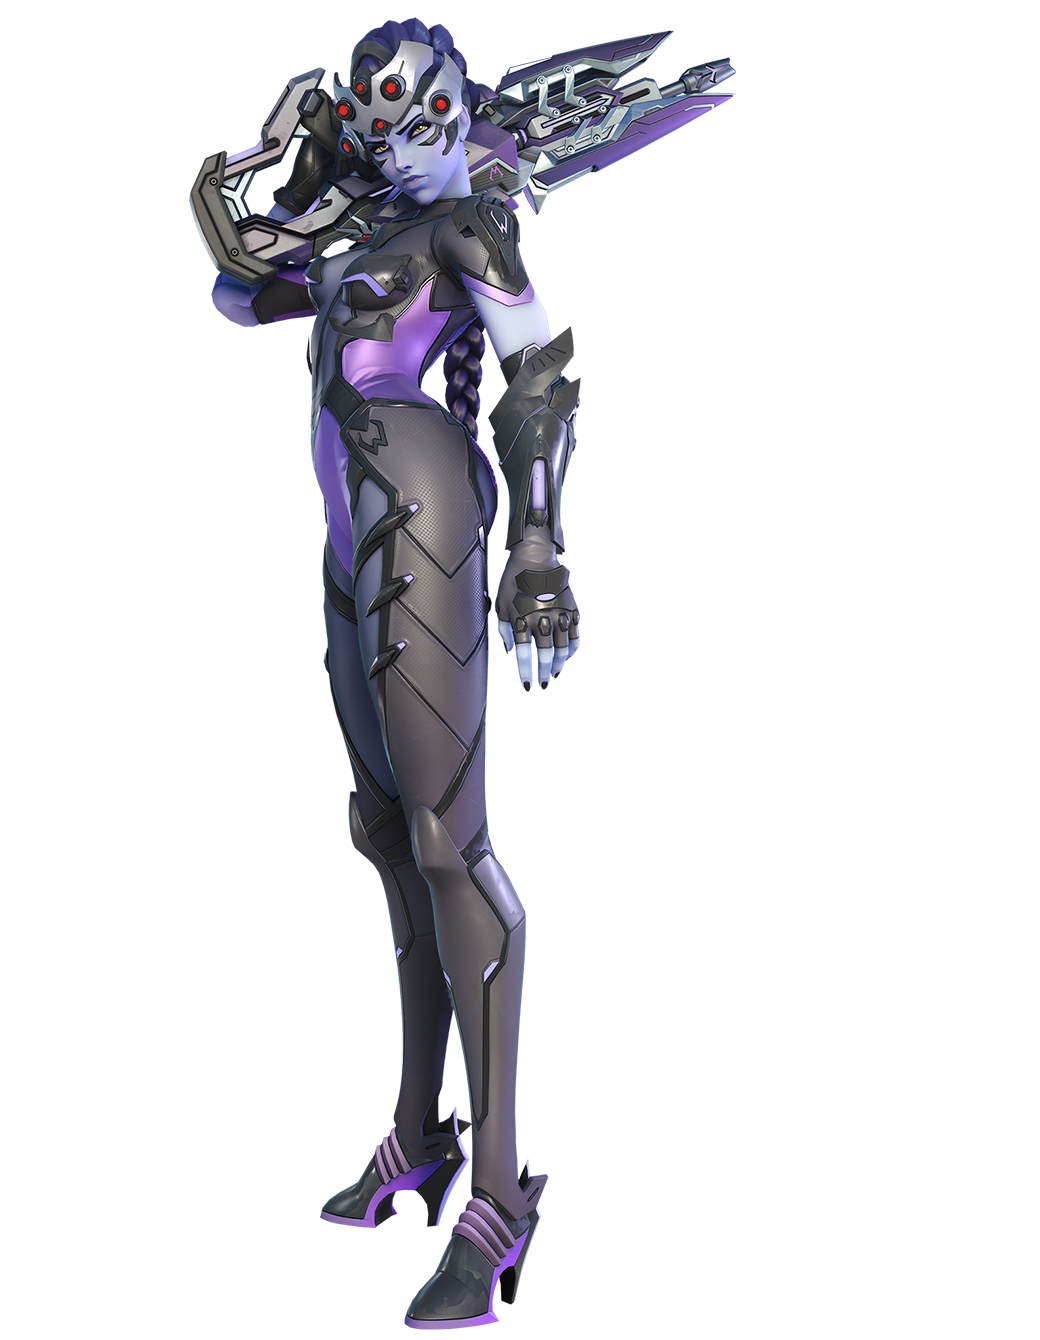 https://static.wikia.nocookie.net/overwatch_gamepedia/images/a/ab/OW2_Widowmaker.png/revision/latest?cb=20210623082021